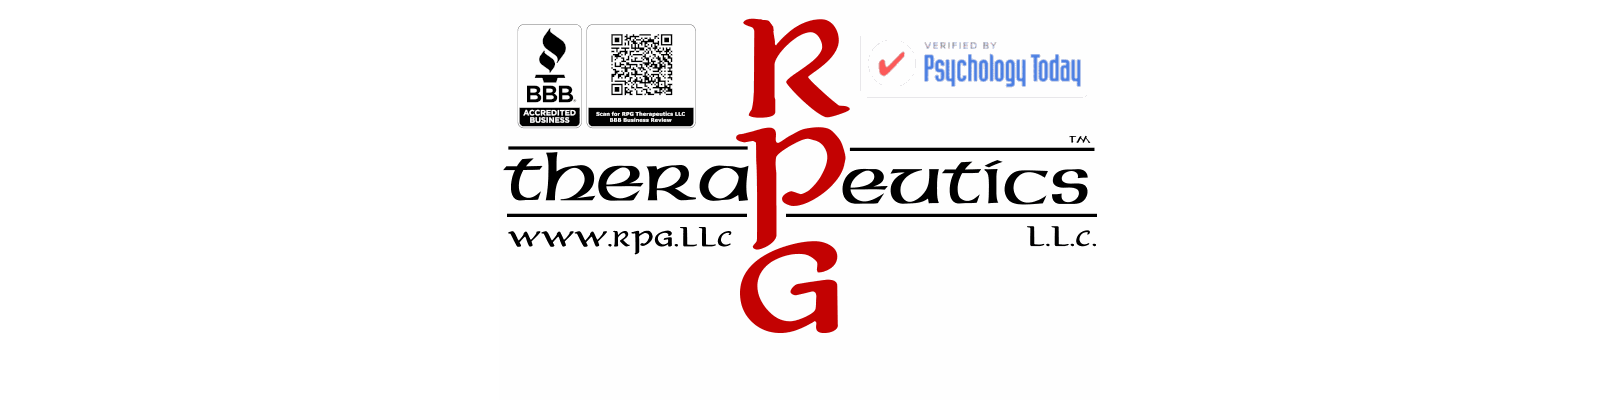 RPG Therapeutics LLC Logo with Better Business Bureau accredited logo and QR Code. Vertical red &quot;RPG&quot; in the middle and black stylized horizonal &quot;therapeutics&quot; text.